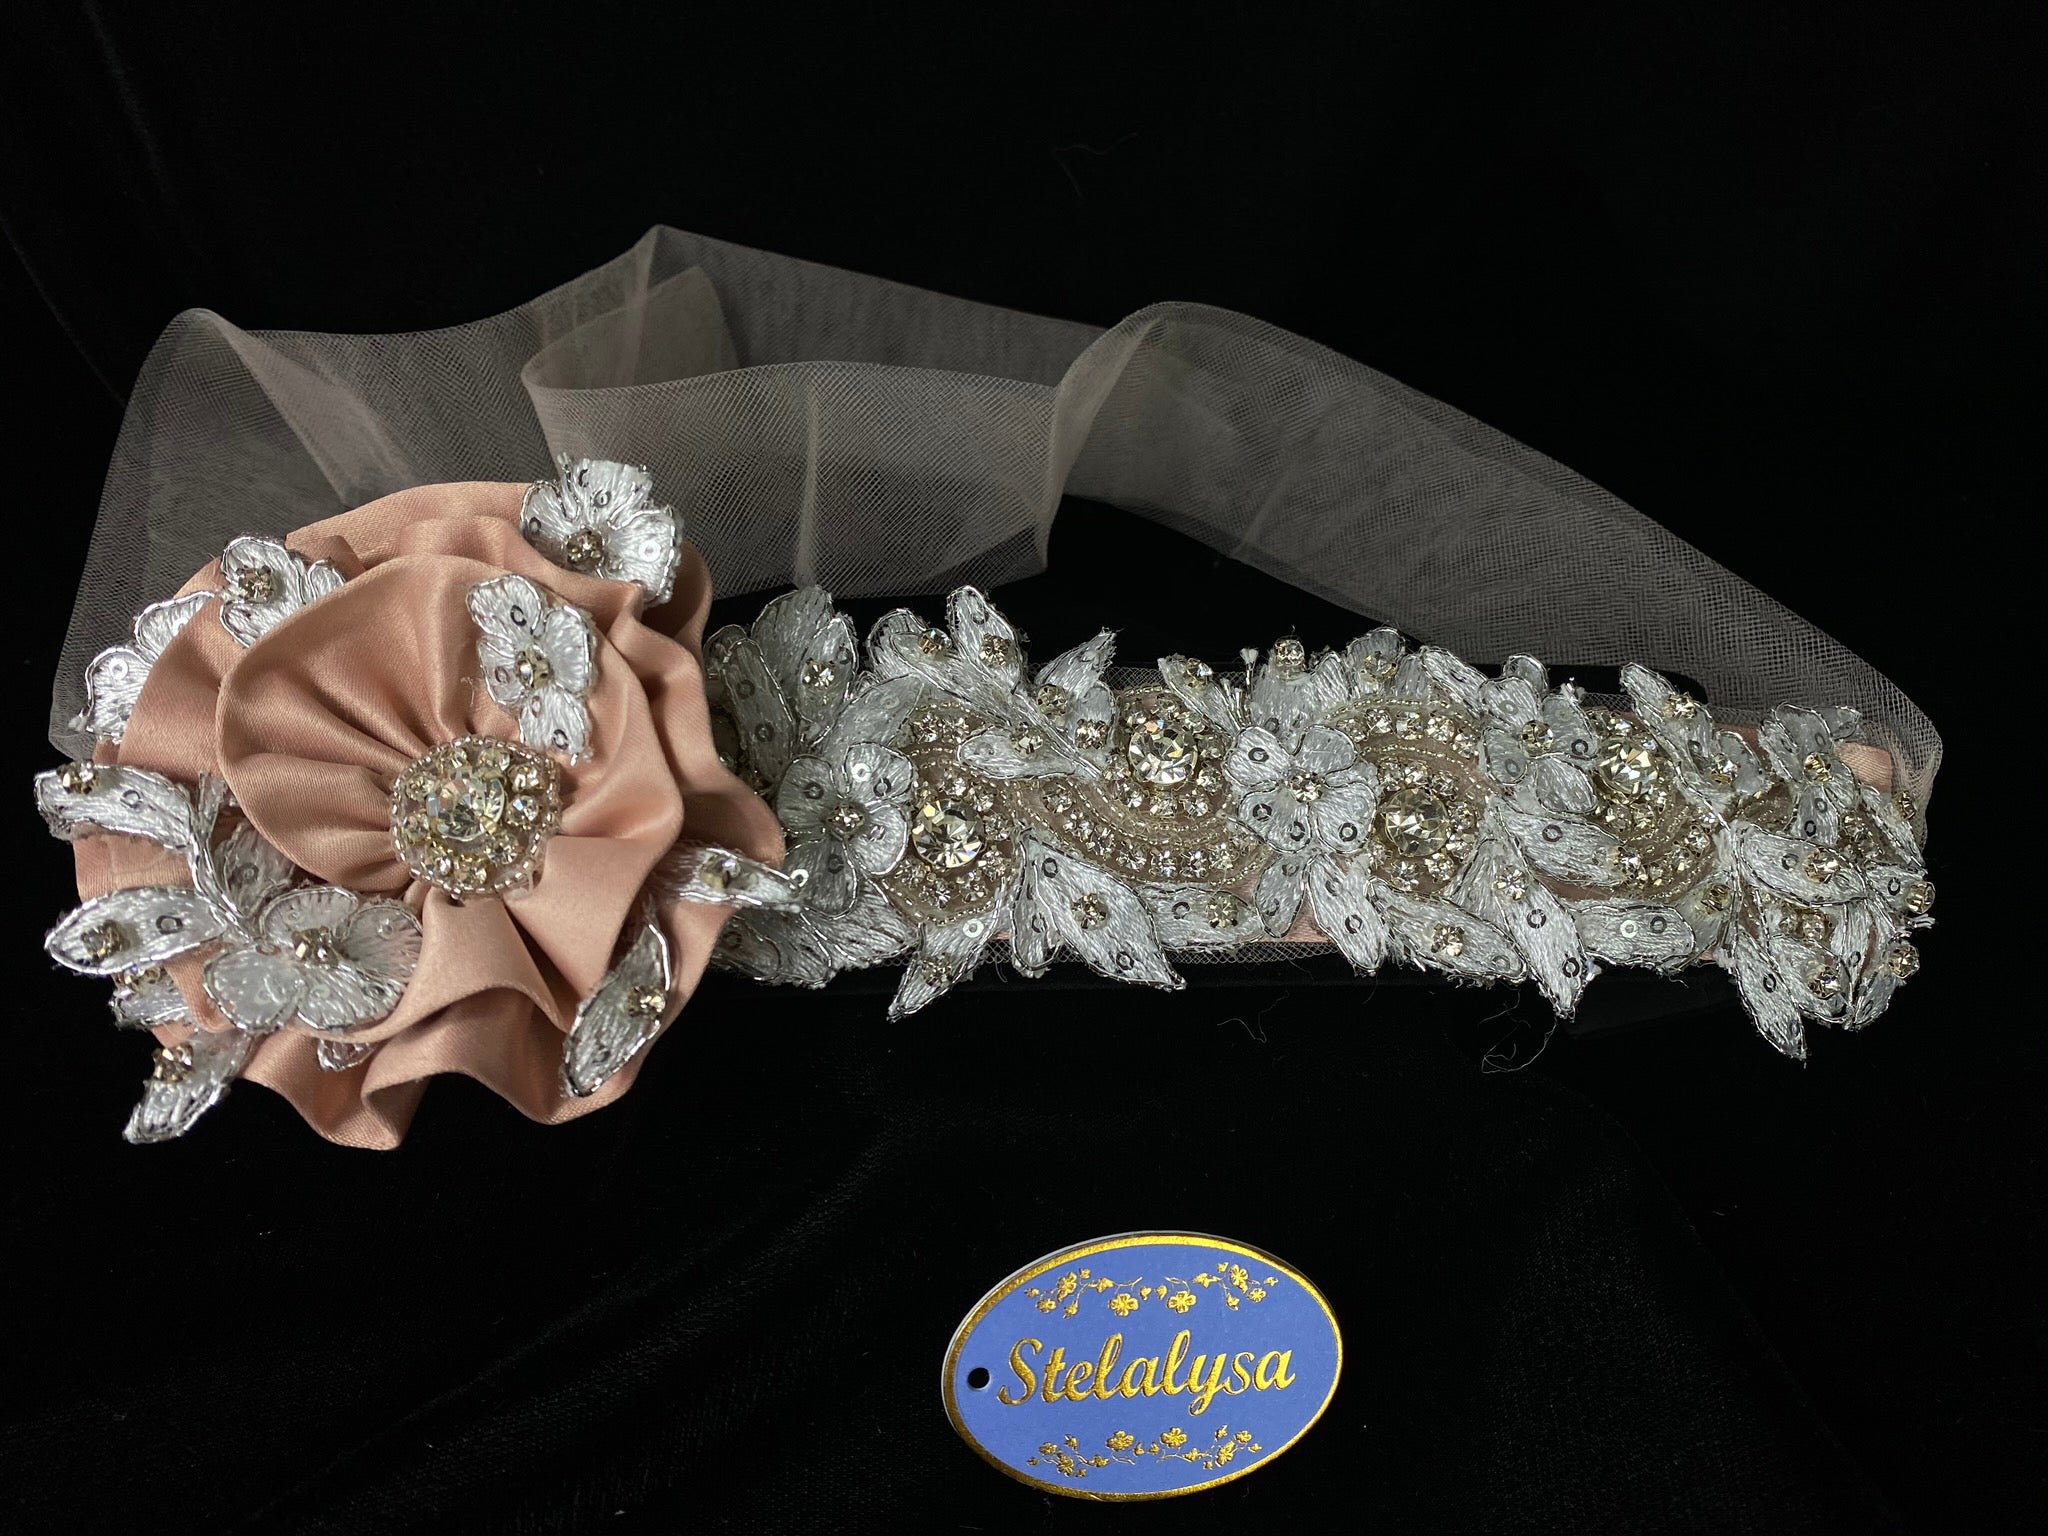 Headband with Strings - Champagne Flower and Tulle Strings  This is an elegant unique handmade and one-of-a-kind headband with a large Copper flower and Champaign long tulle strings attached.  The large flower is uniquely decorated with rhinestones, beads, and hand stitched flowers. The soft headband is made with elegant flowers with sequins, silver sequins, and rhinestones.  